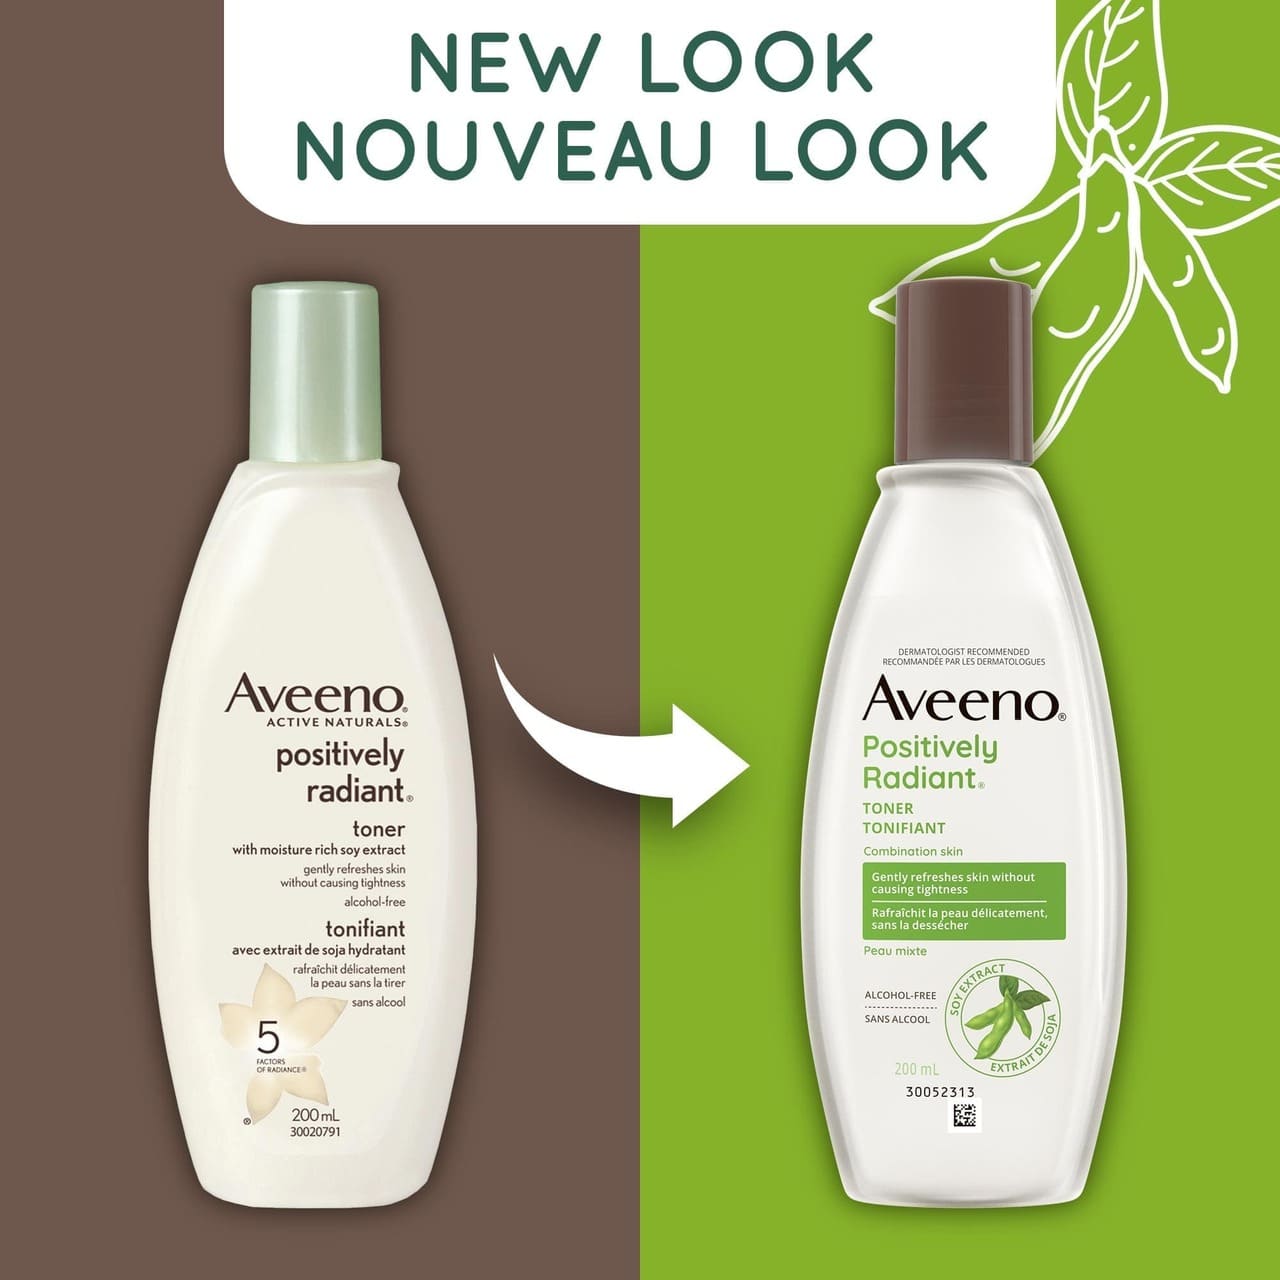 Old and new packaging of AVEENO® Positively Radiant Toner, 200 mL bottles, with text 'new look'